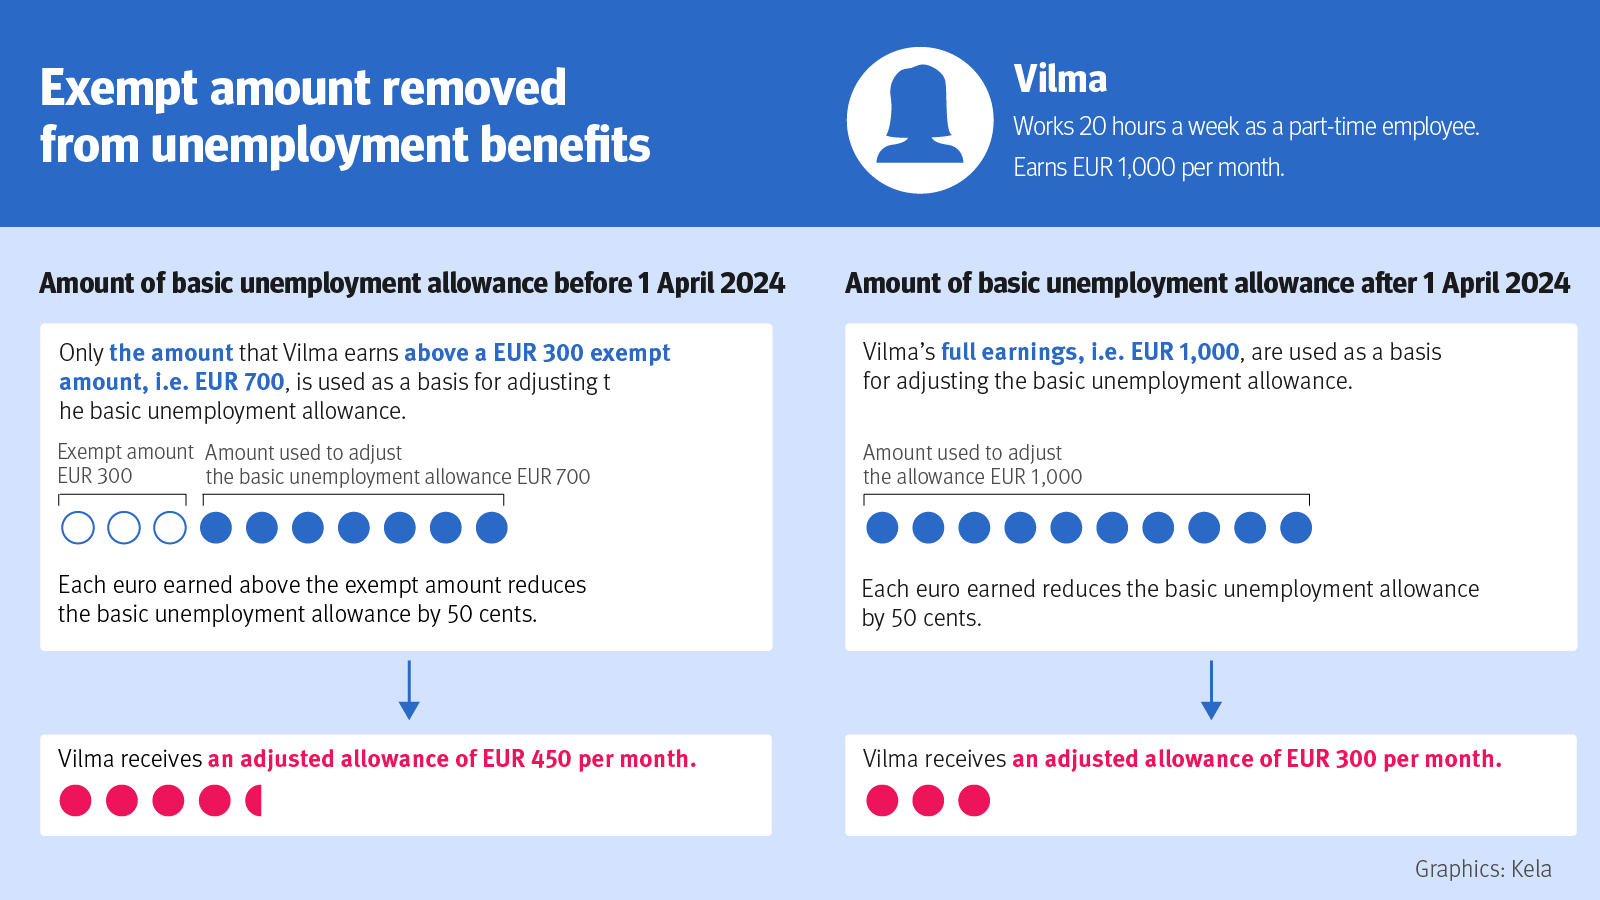 The image shows how the elimination of the exempt amount affects the amount of unemployment benefits received by the person in the example. The data for the image are shown in a table below the image.